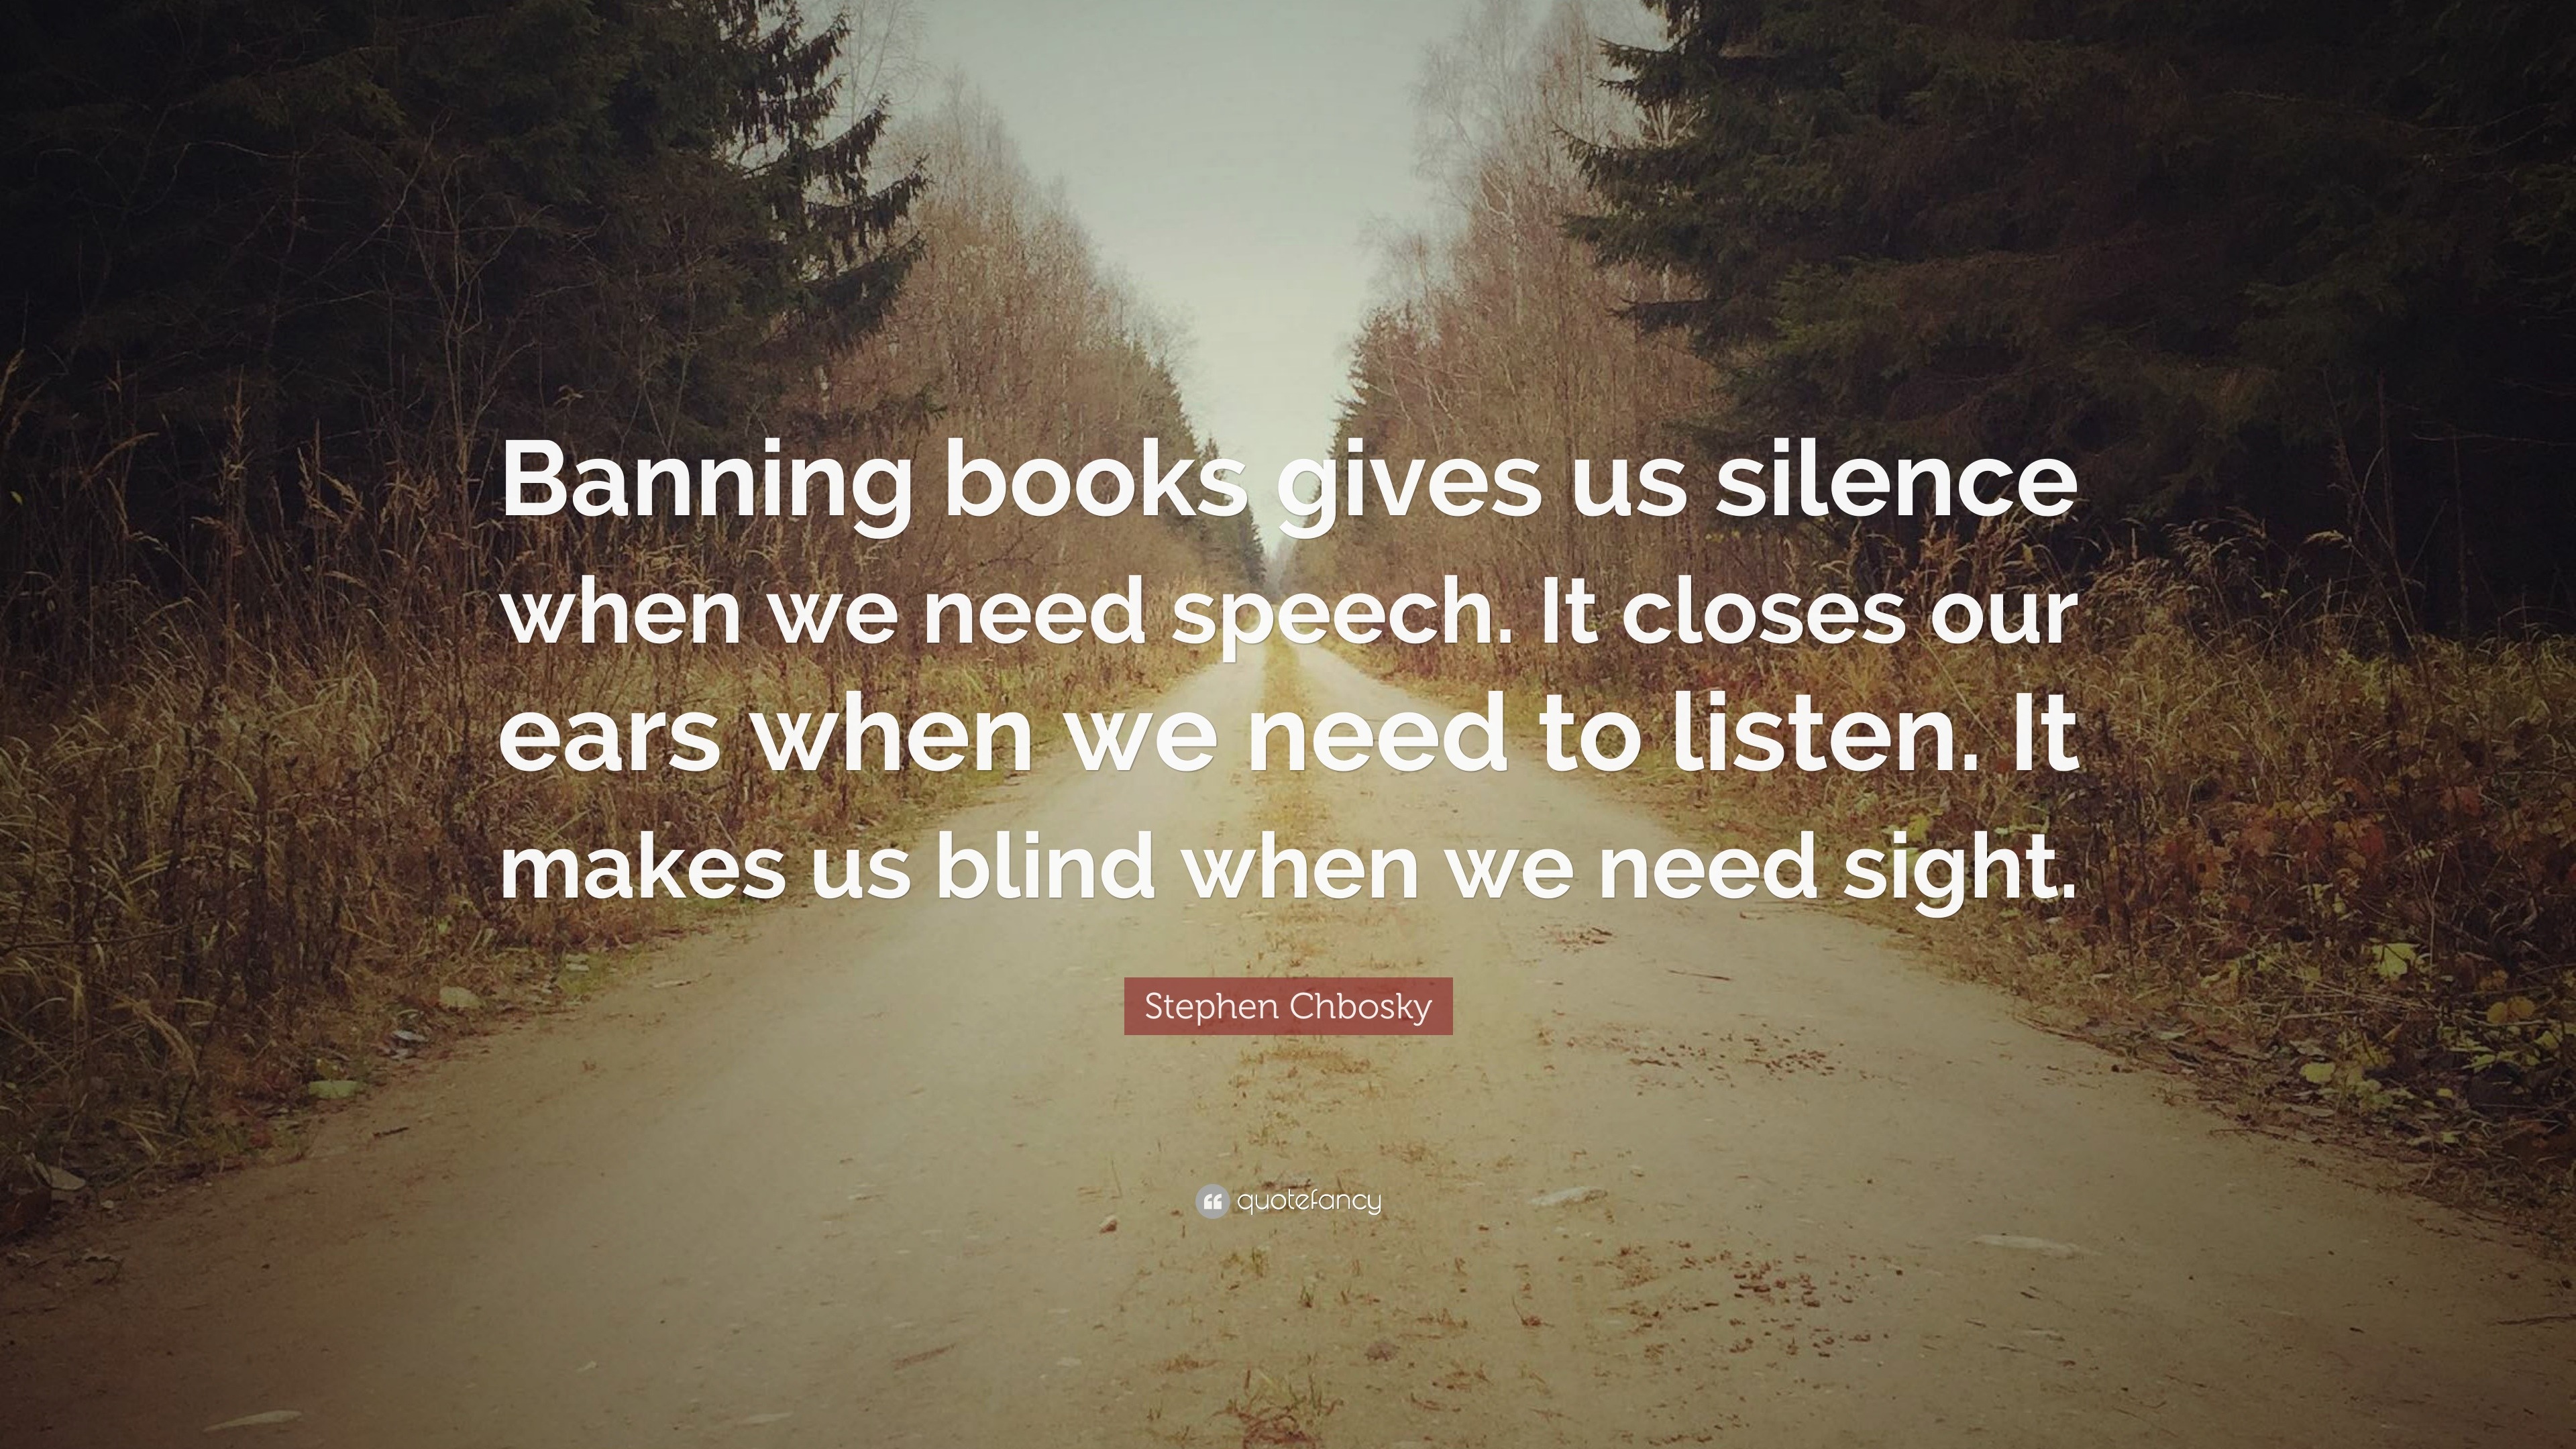 Stephen Chbosky Quote: “Banning books gives us silence when we need